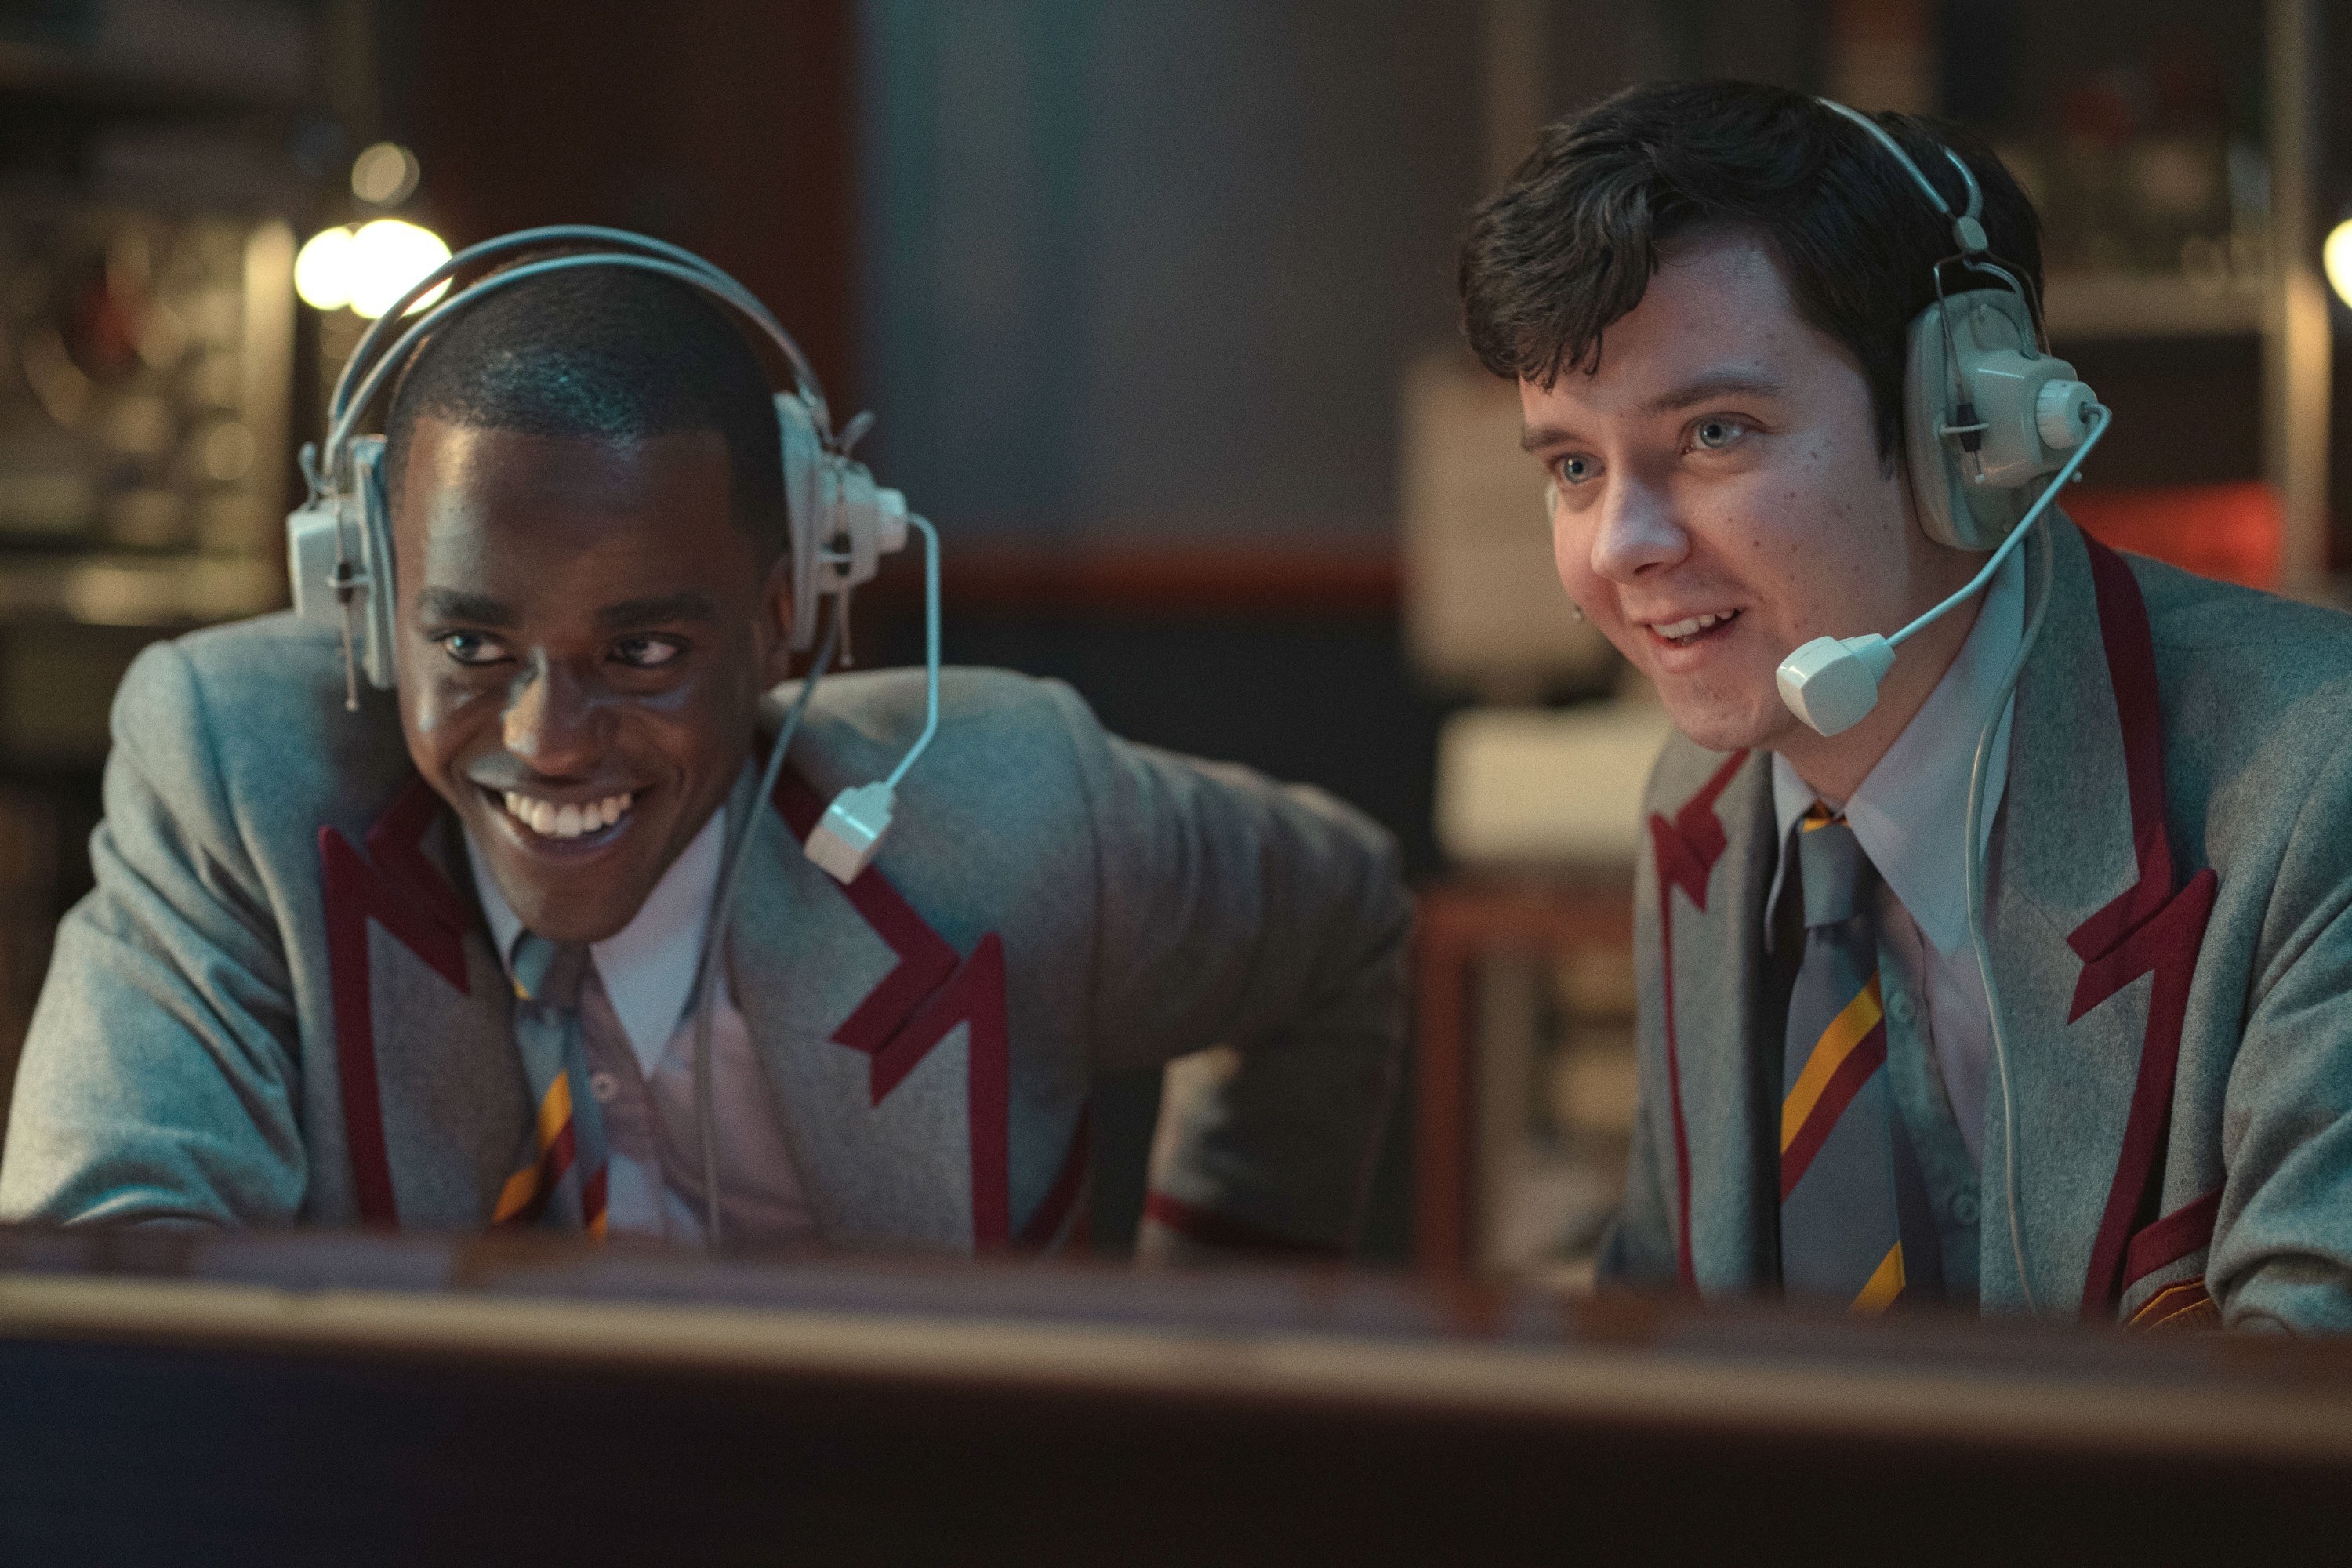 Ncuti Gatwa and Asa Butterfield commentate while wearing headsets